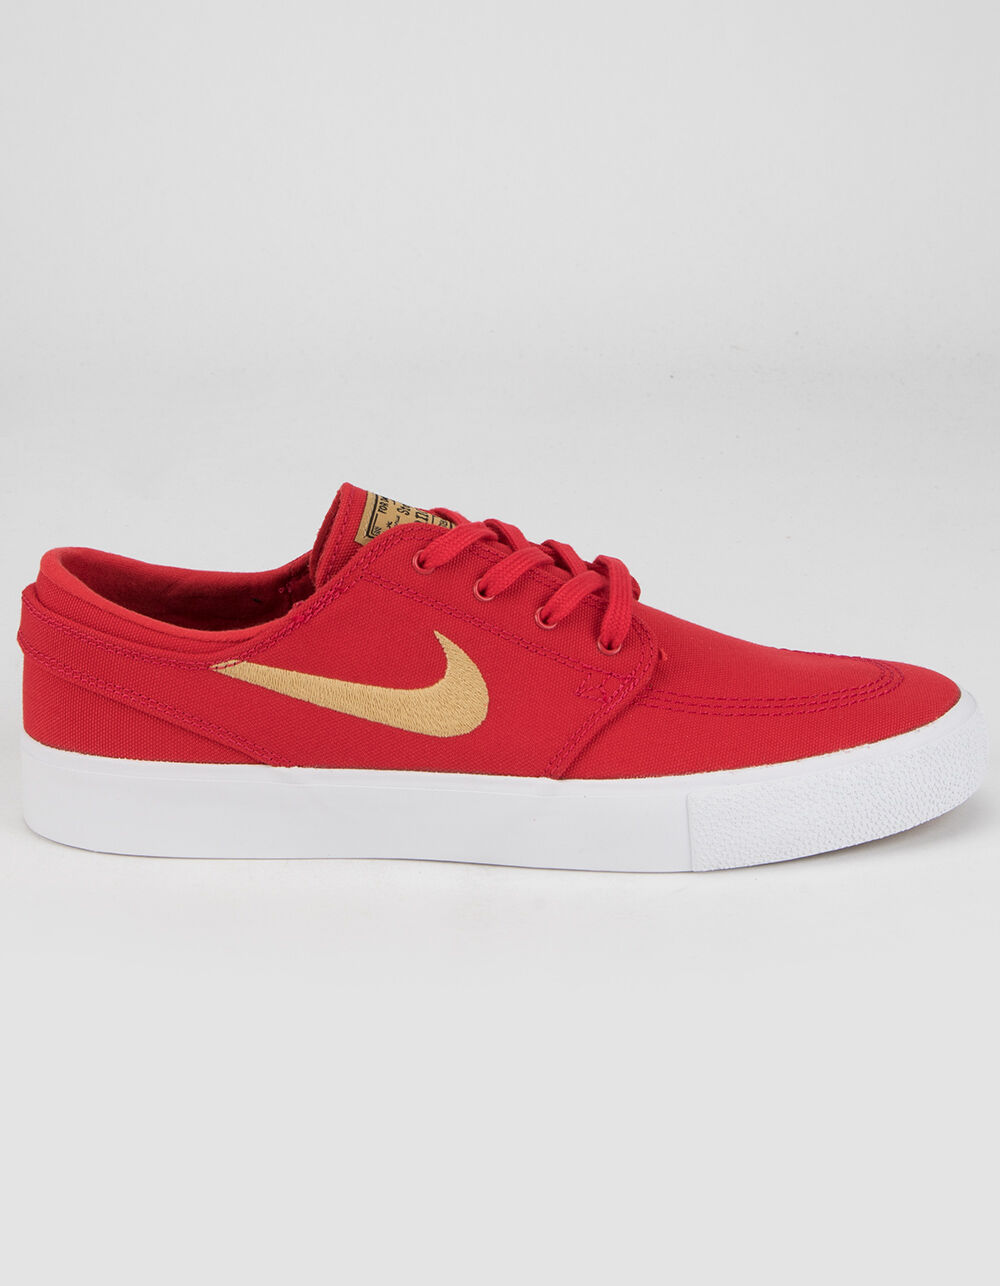 NIKE SB Zoom Stefan Janoski Canvas Red & Gold Shoes - RED/GOLD | Tillys